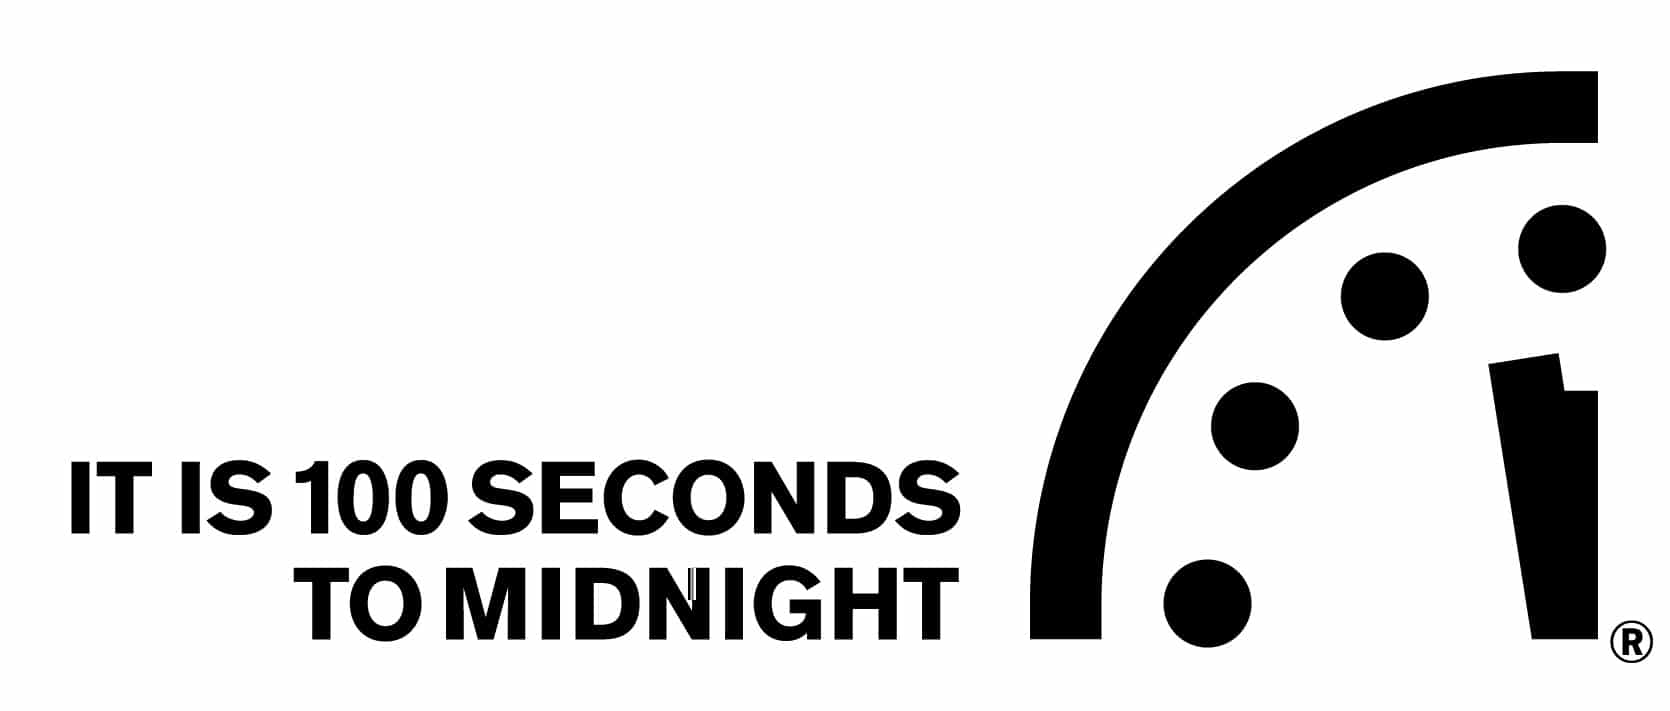 bulletin atomic scientists logo it is 100 seconds to midnight